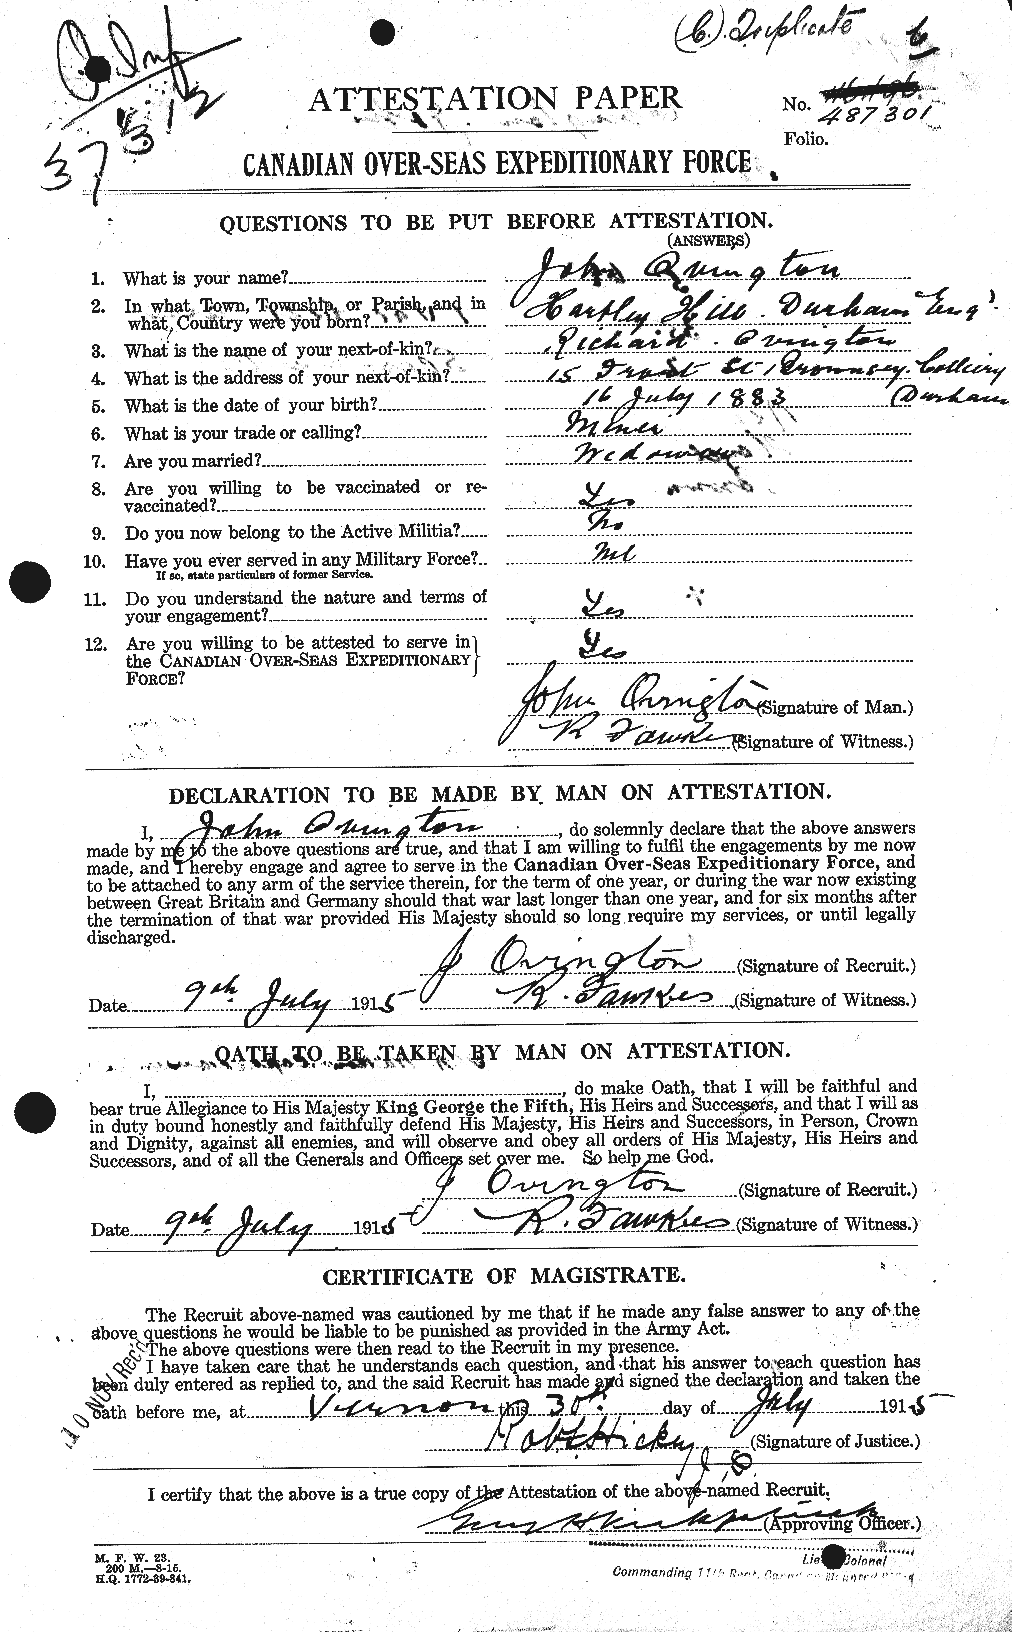 Personnel Records of the First World War - CEF 561172a